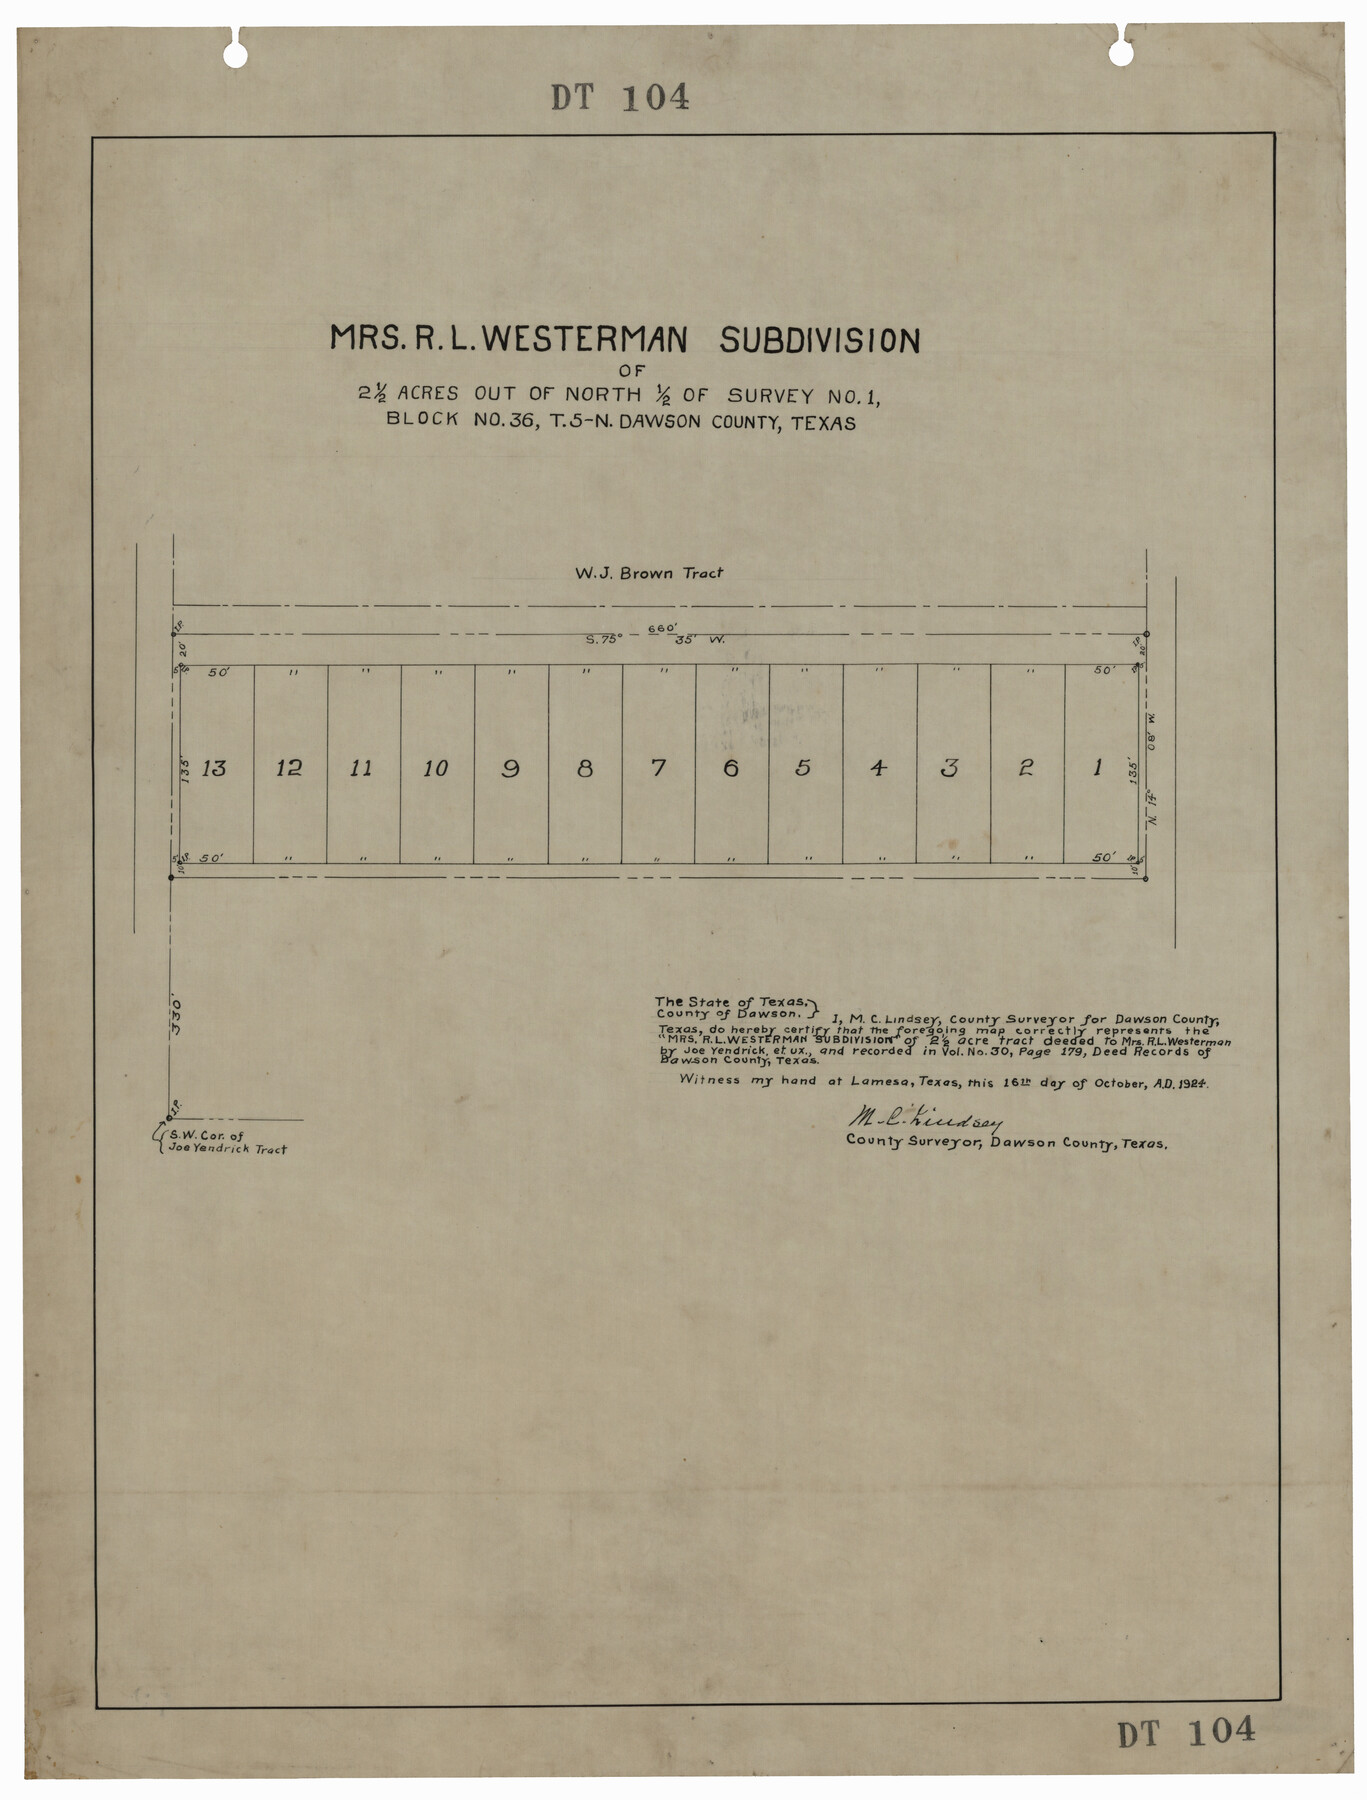 92591, Mrs. R. L. Westerman Subdivision of 2 1/2 Acres out of North Half of Survey Number 1, Block Number 36, Township 5 North. Dawson County, Texas, Twichell Survey Records